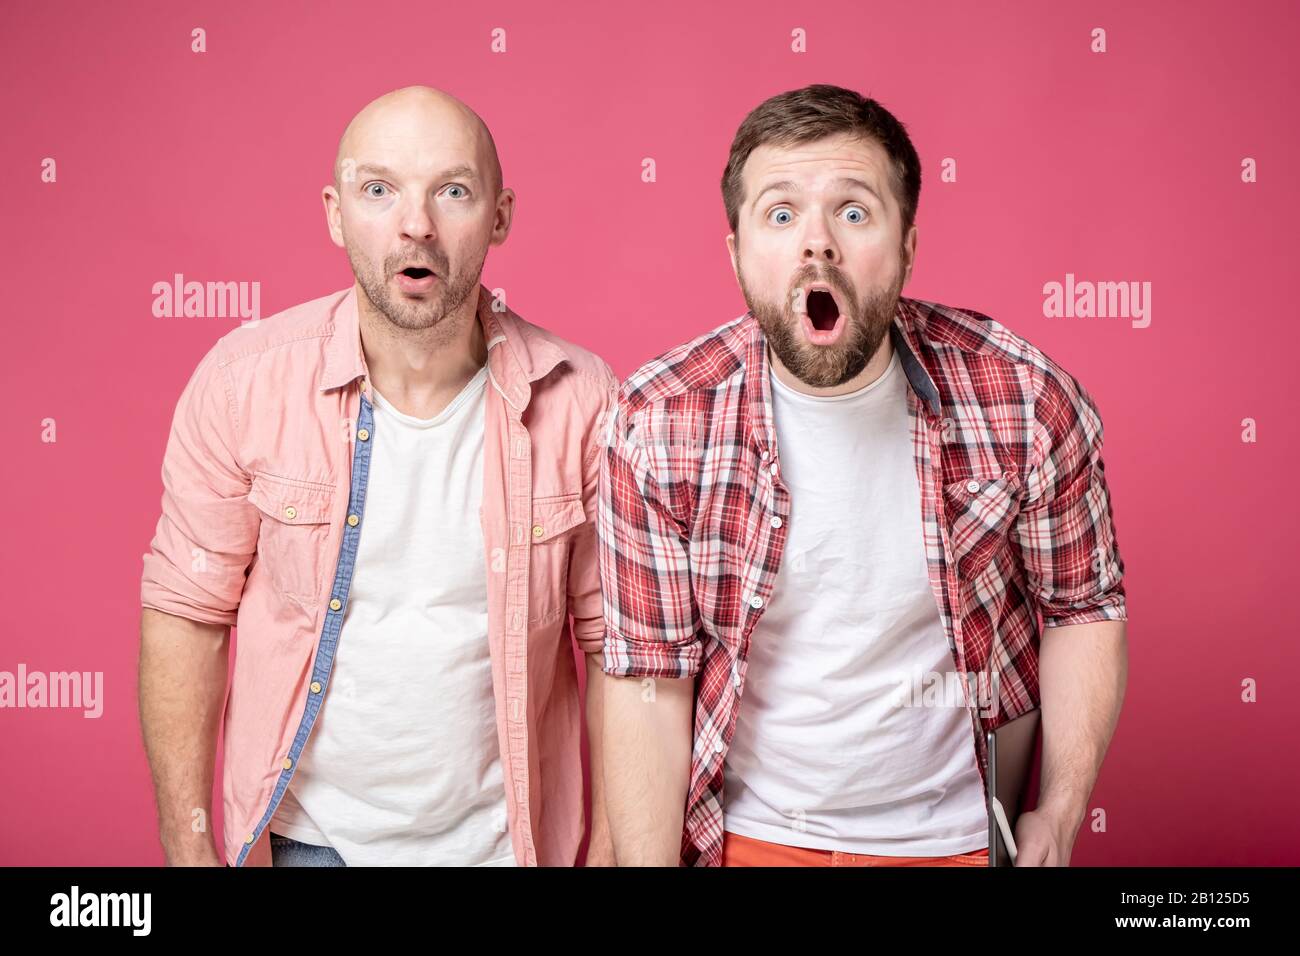 Two men are shocked, they open their mouths in amazement and look at the camera with big eyes, with interesting excited faces. Stock Photo